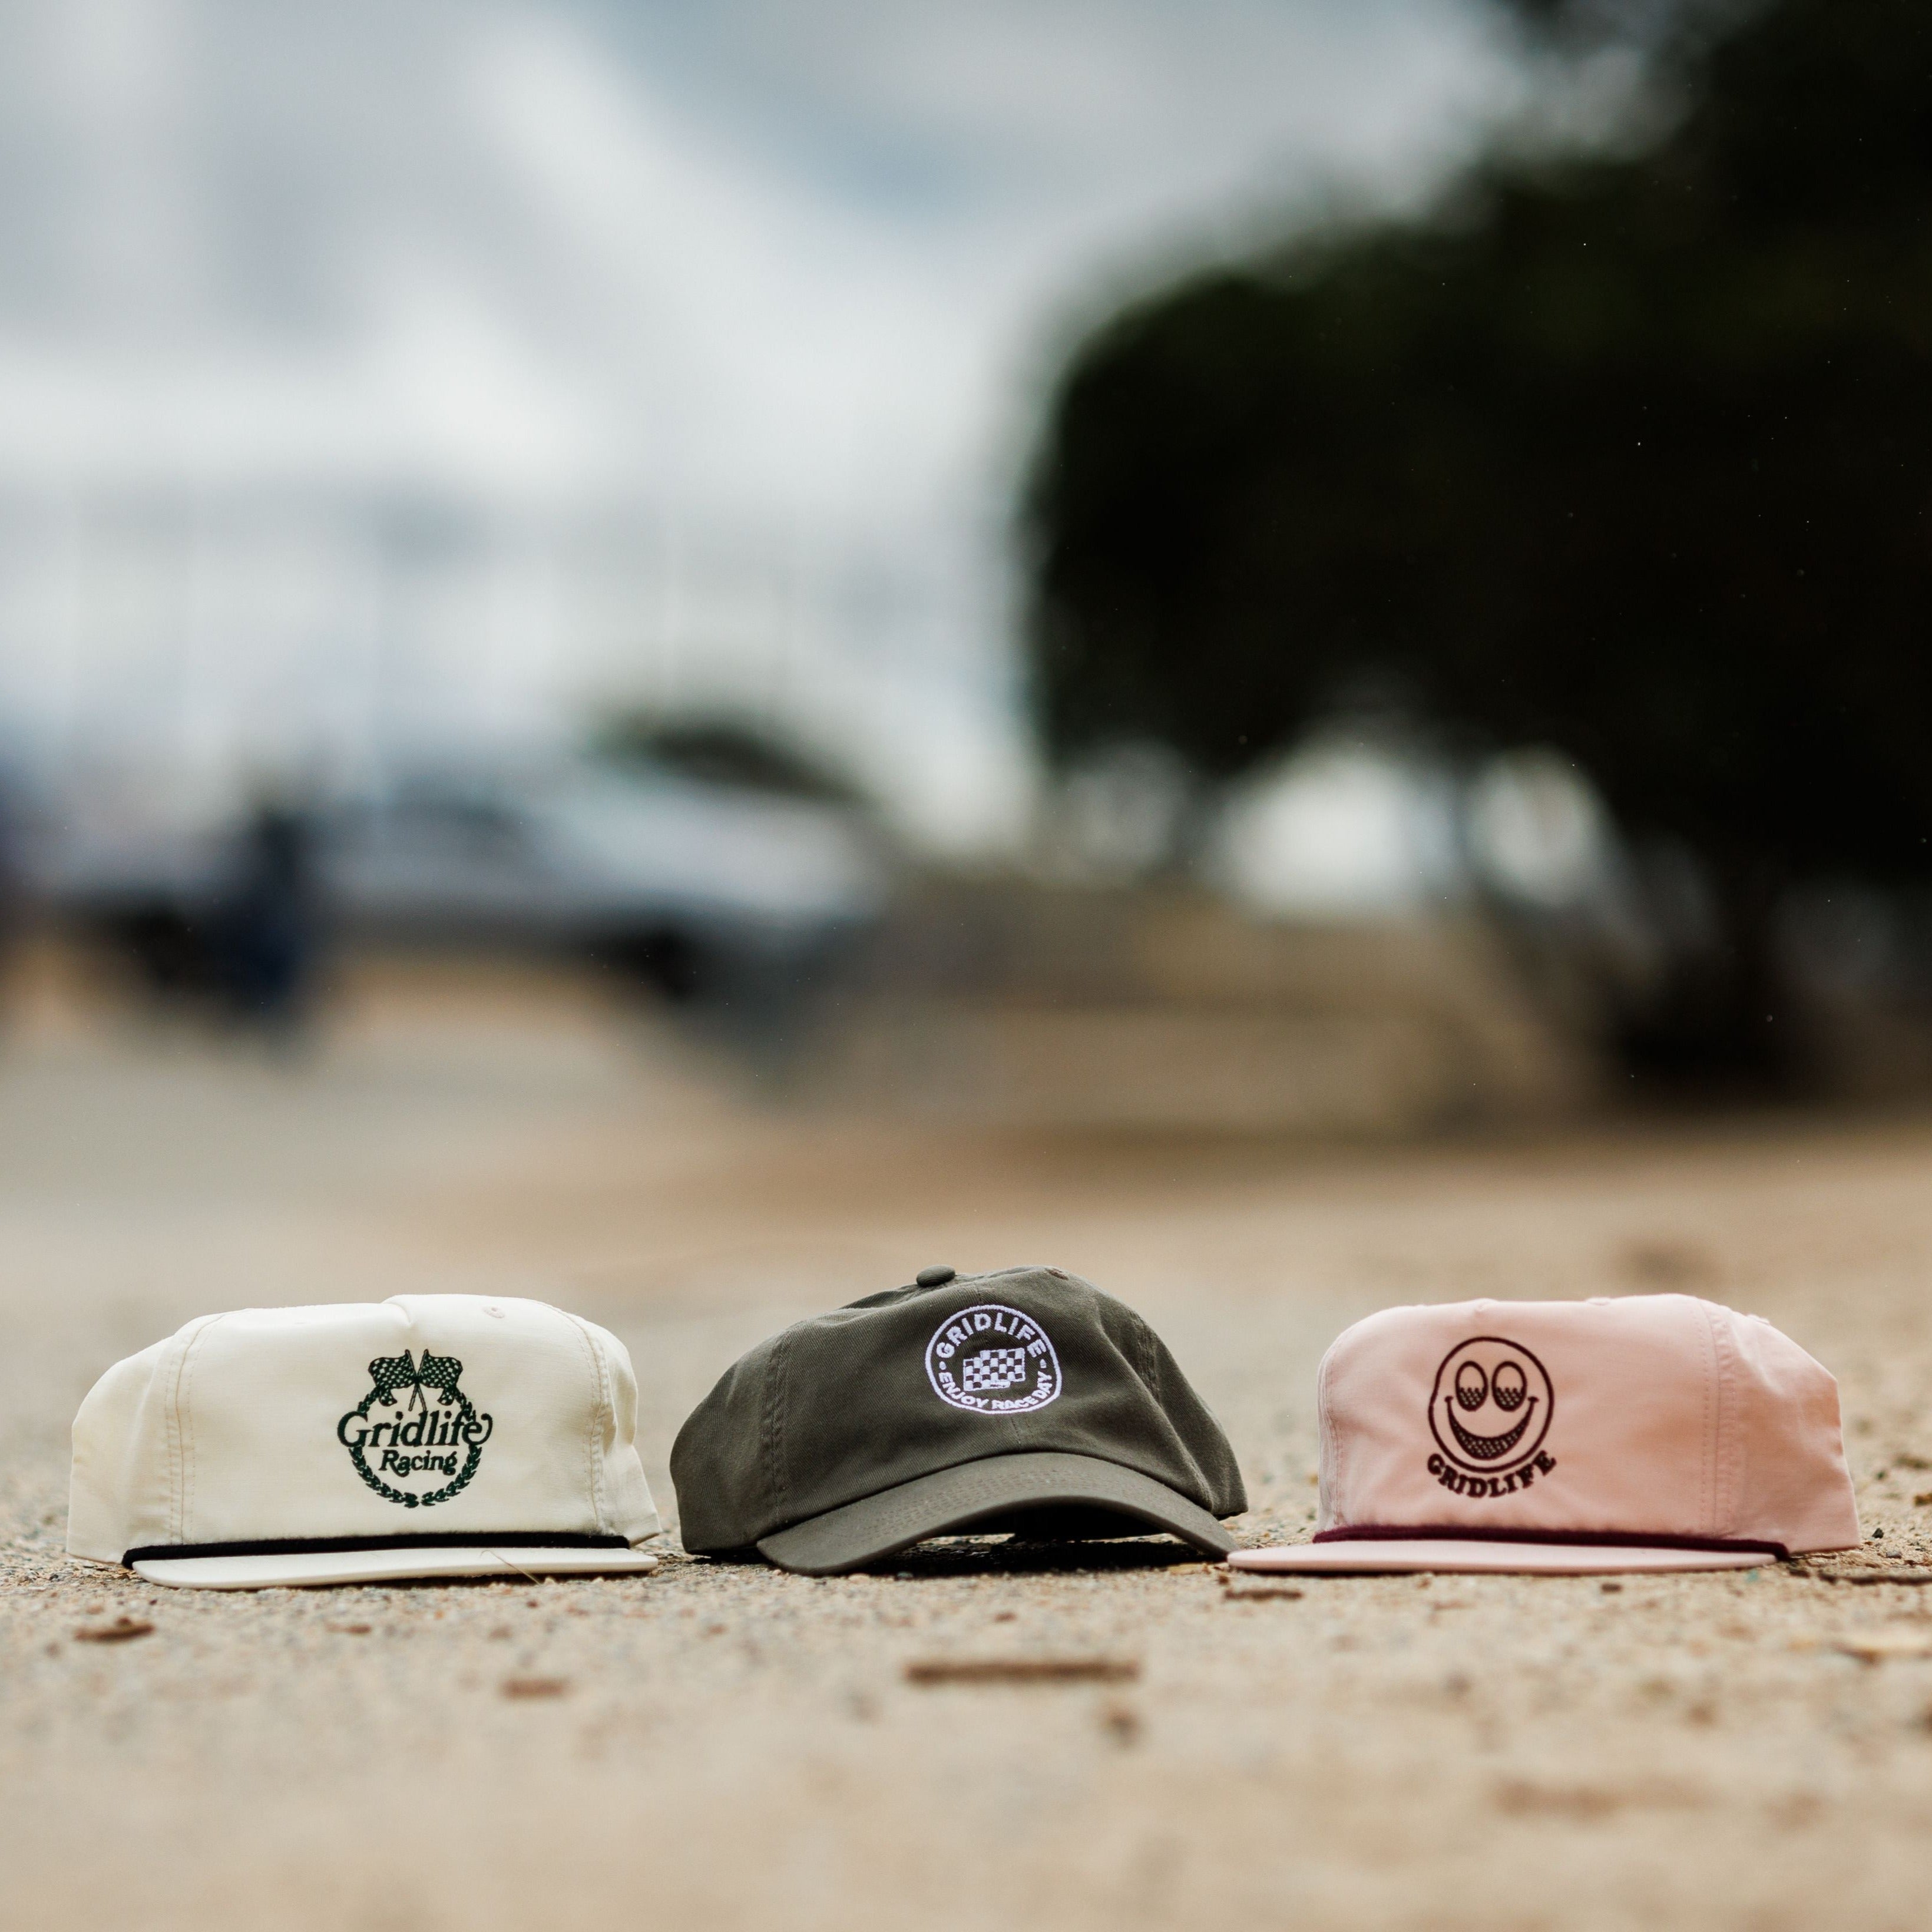 Assortment of GRIDLIFE hats. From left to right; Laguna Crest, Enjoy Raceday Dad hat, and the pink smiley